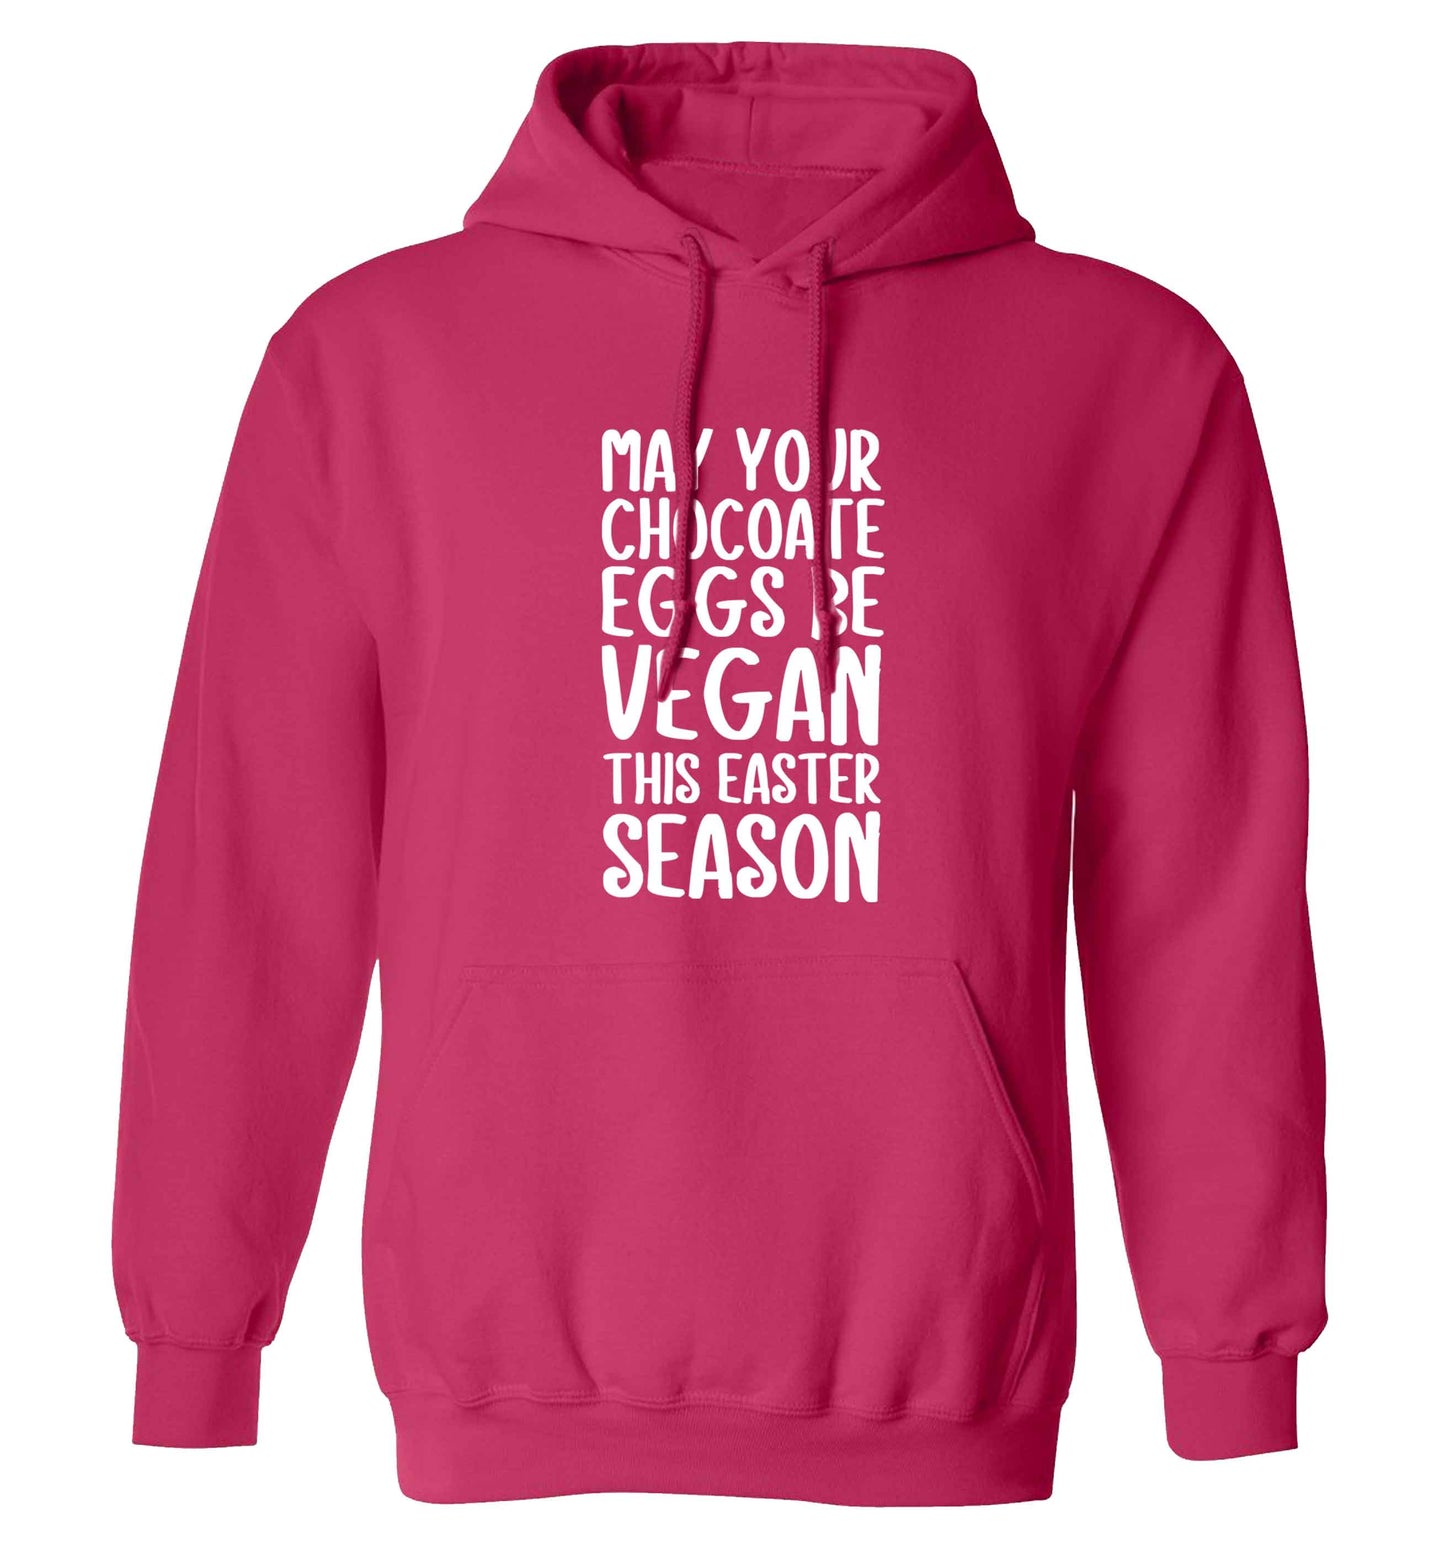 Easter bunny approved! Vegans will love this easter themed adults unisex pink hoodie 2XL